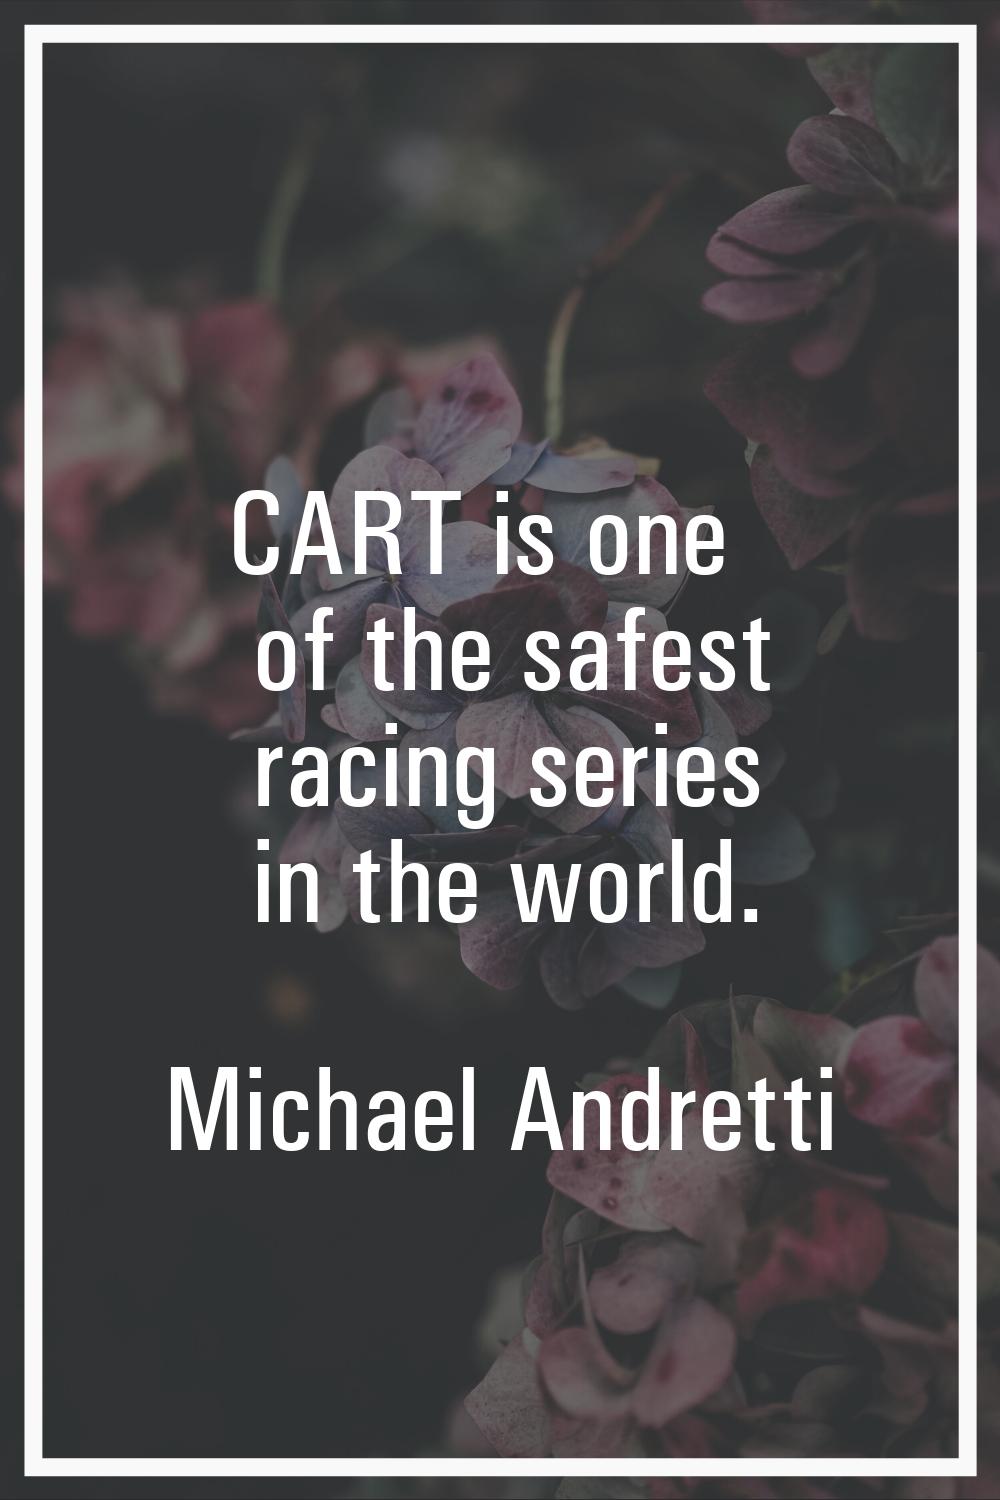 CART is one of the safest racing series in the world.